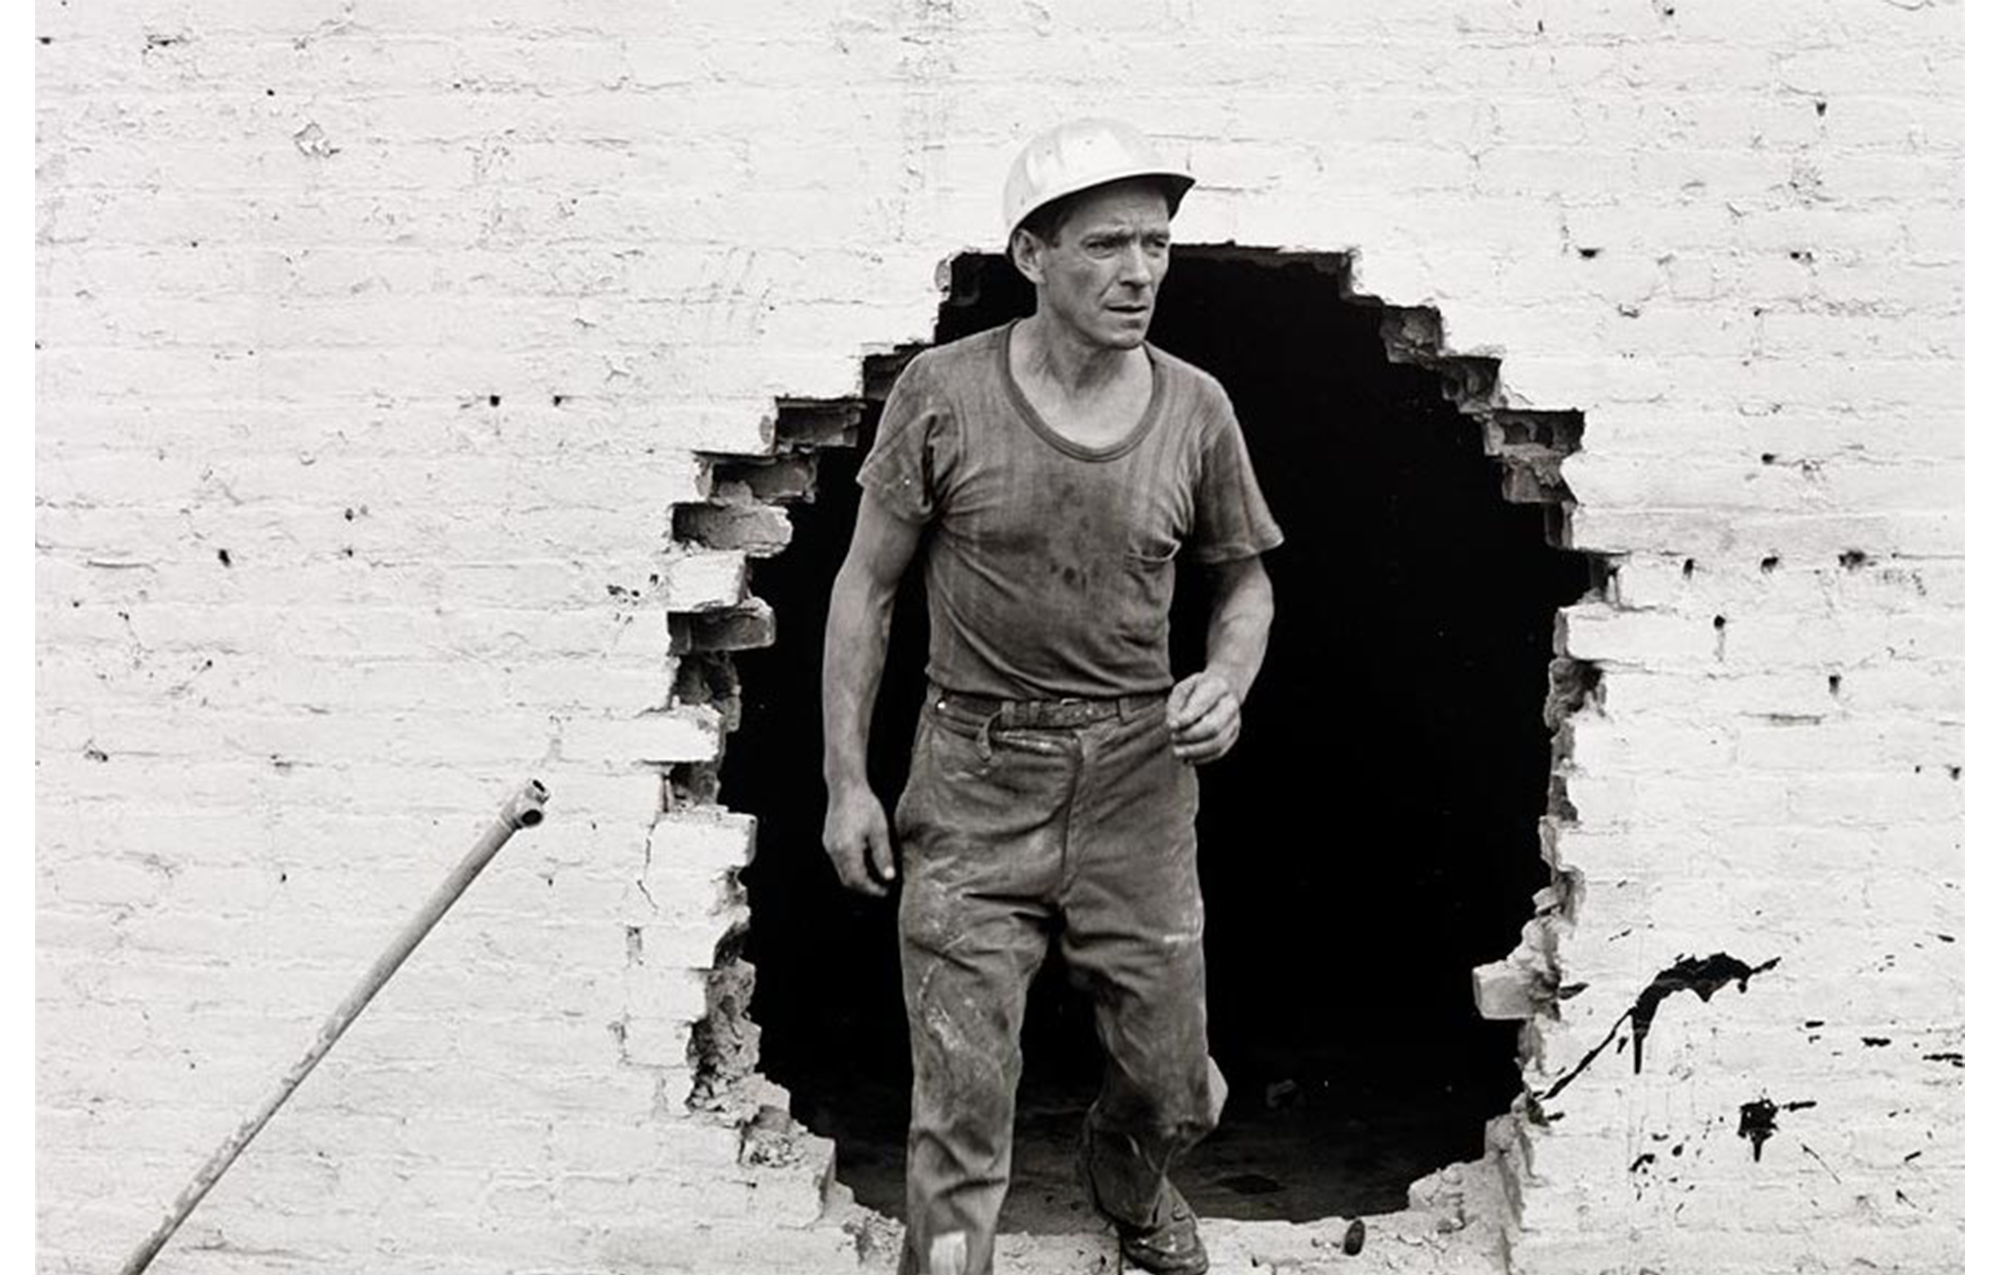 man in dirty T shirt and jeans with hard hat coming out of a large hole in a white painted brick wall, a diagonal pipe sticking up at the lower left